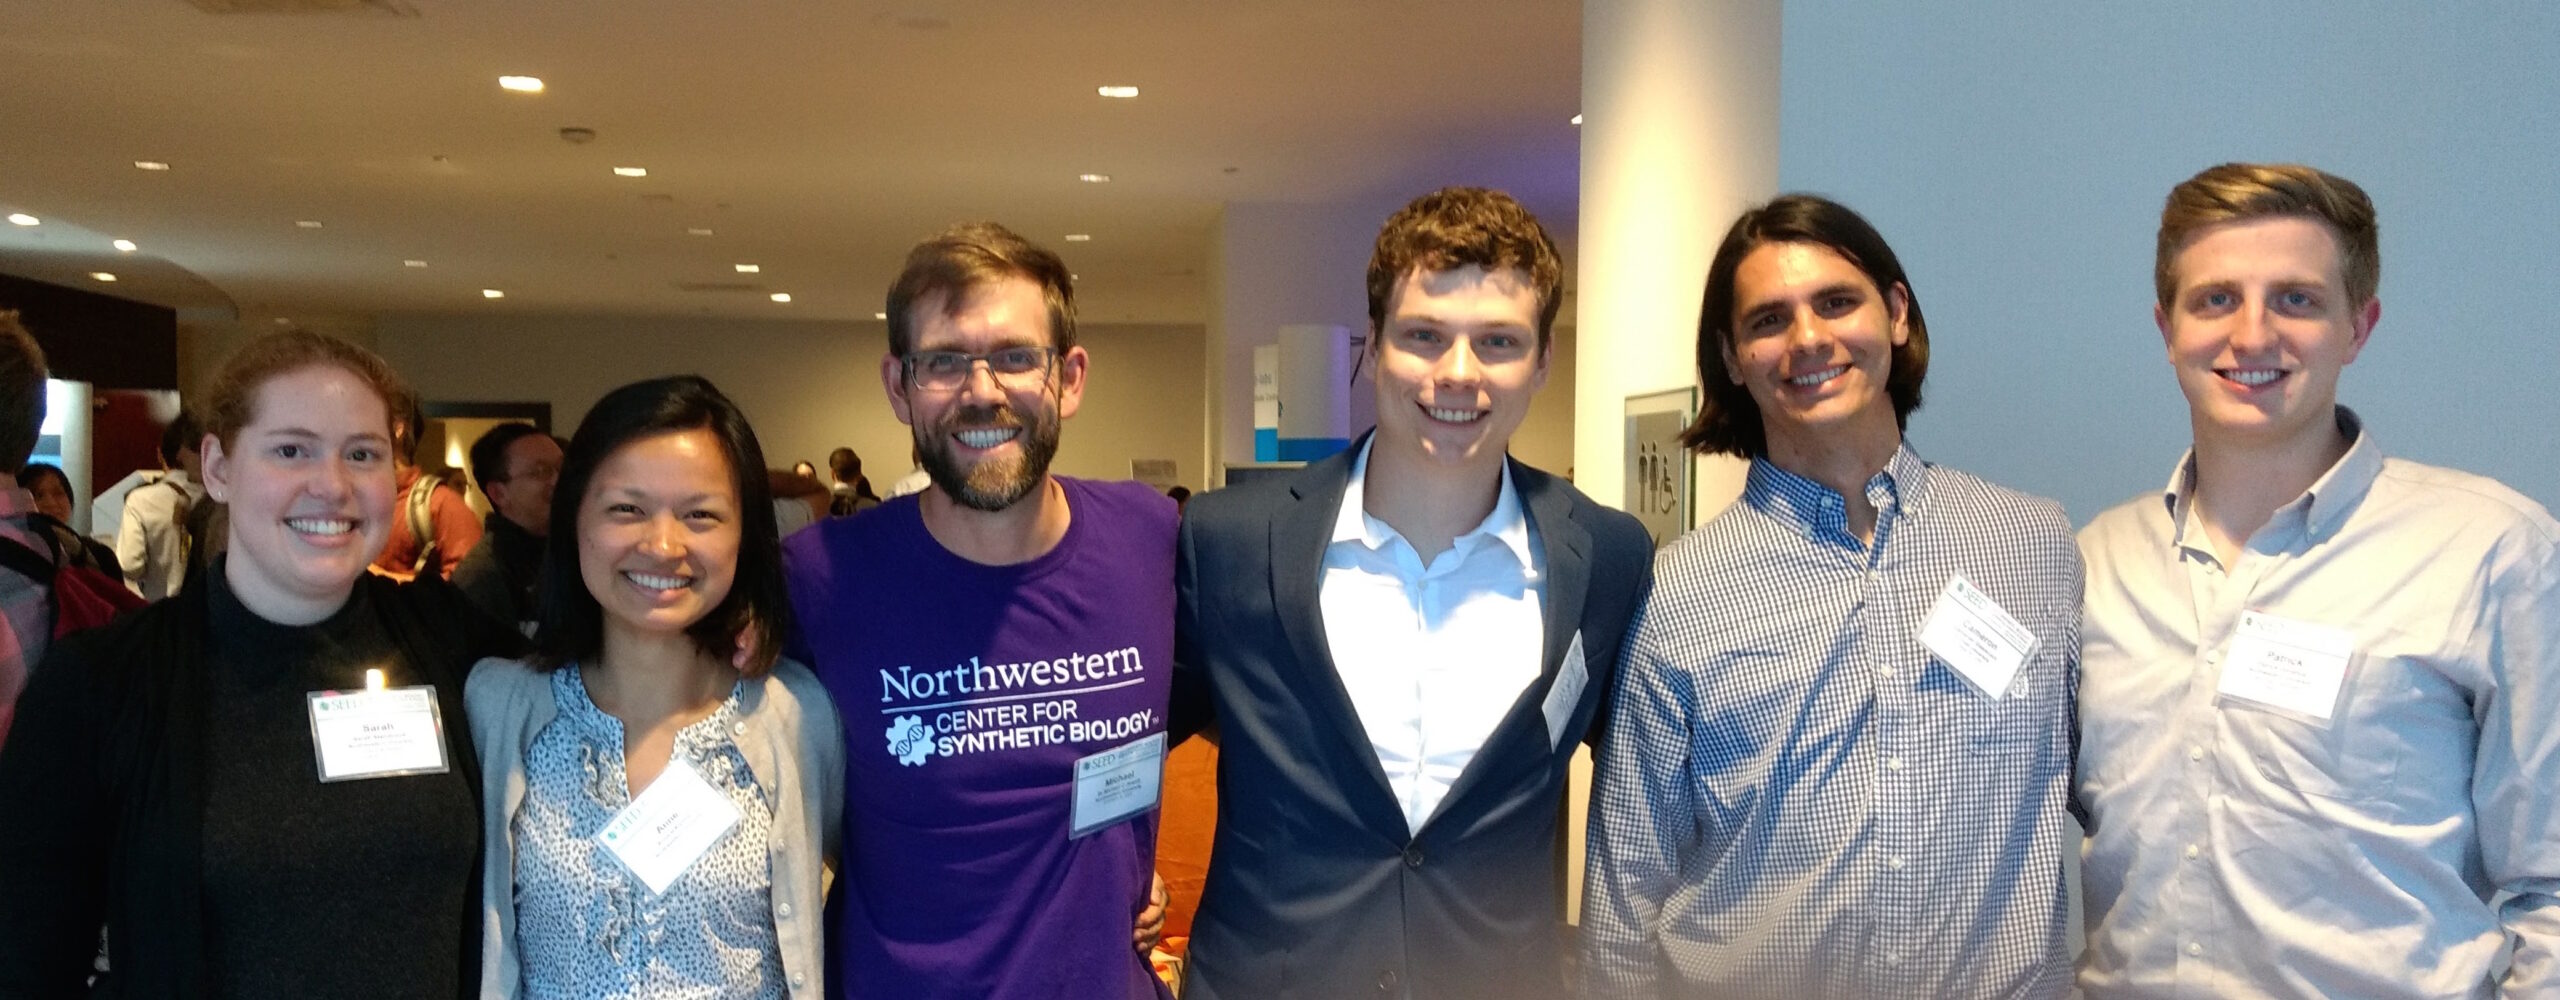 Northwestern Researchers at SEED 2017